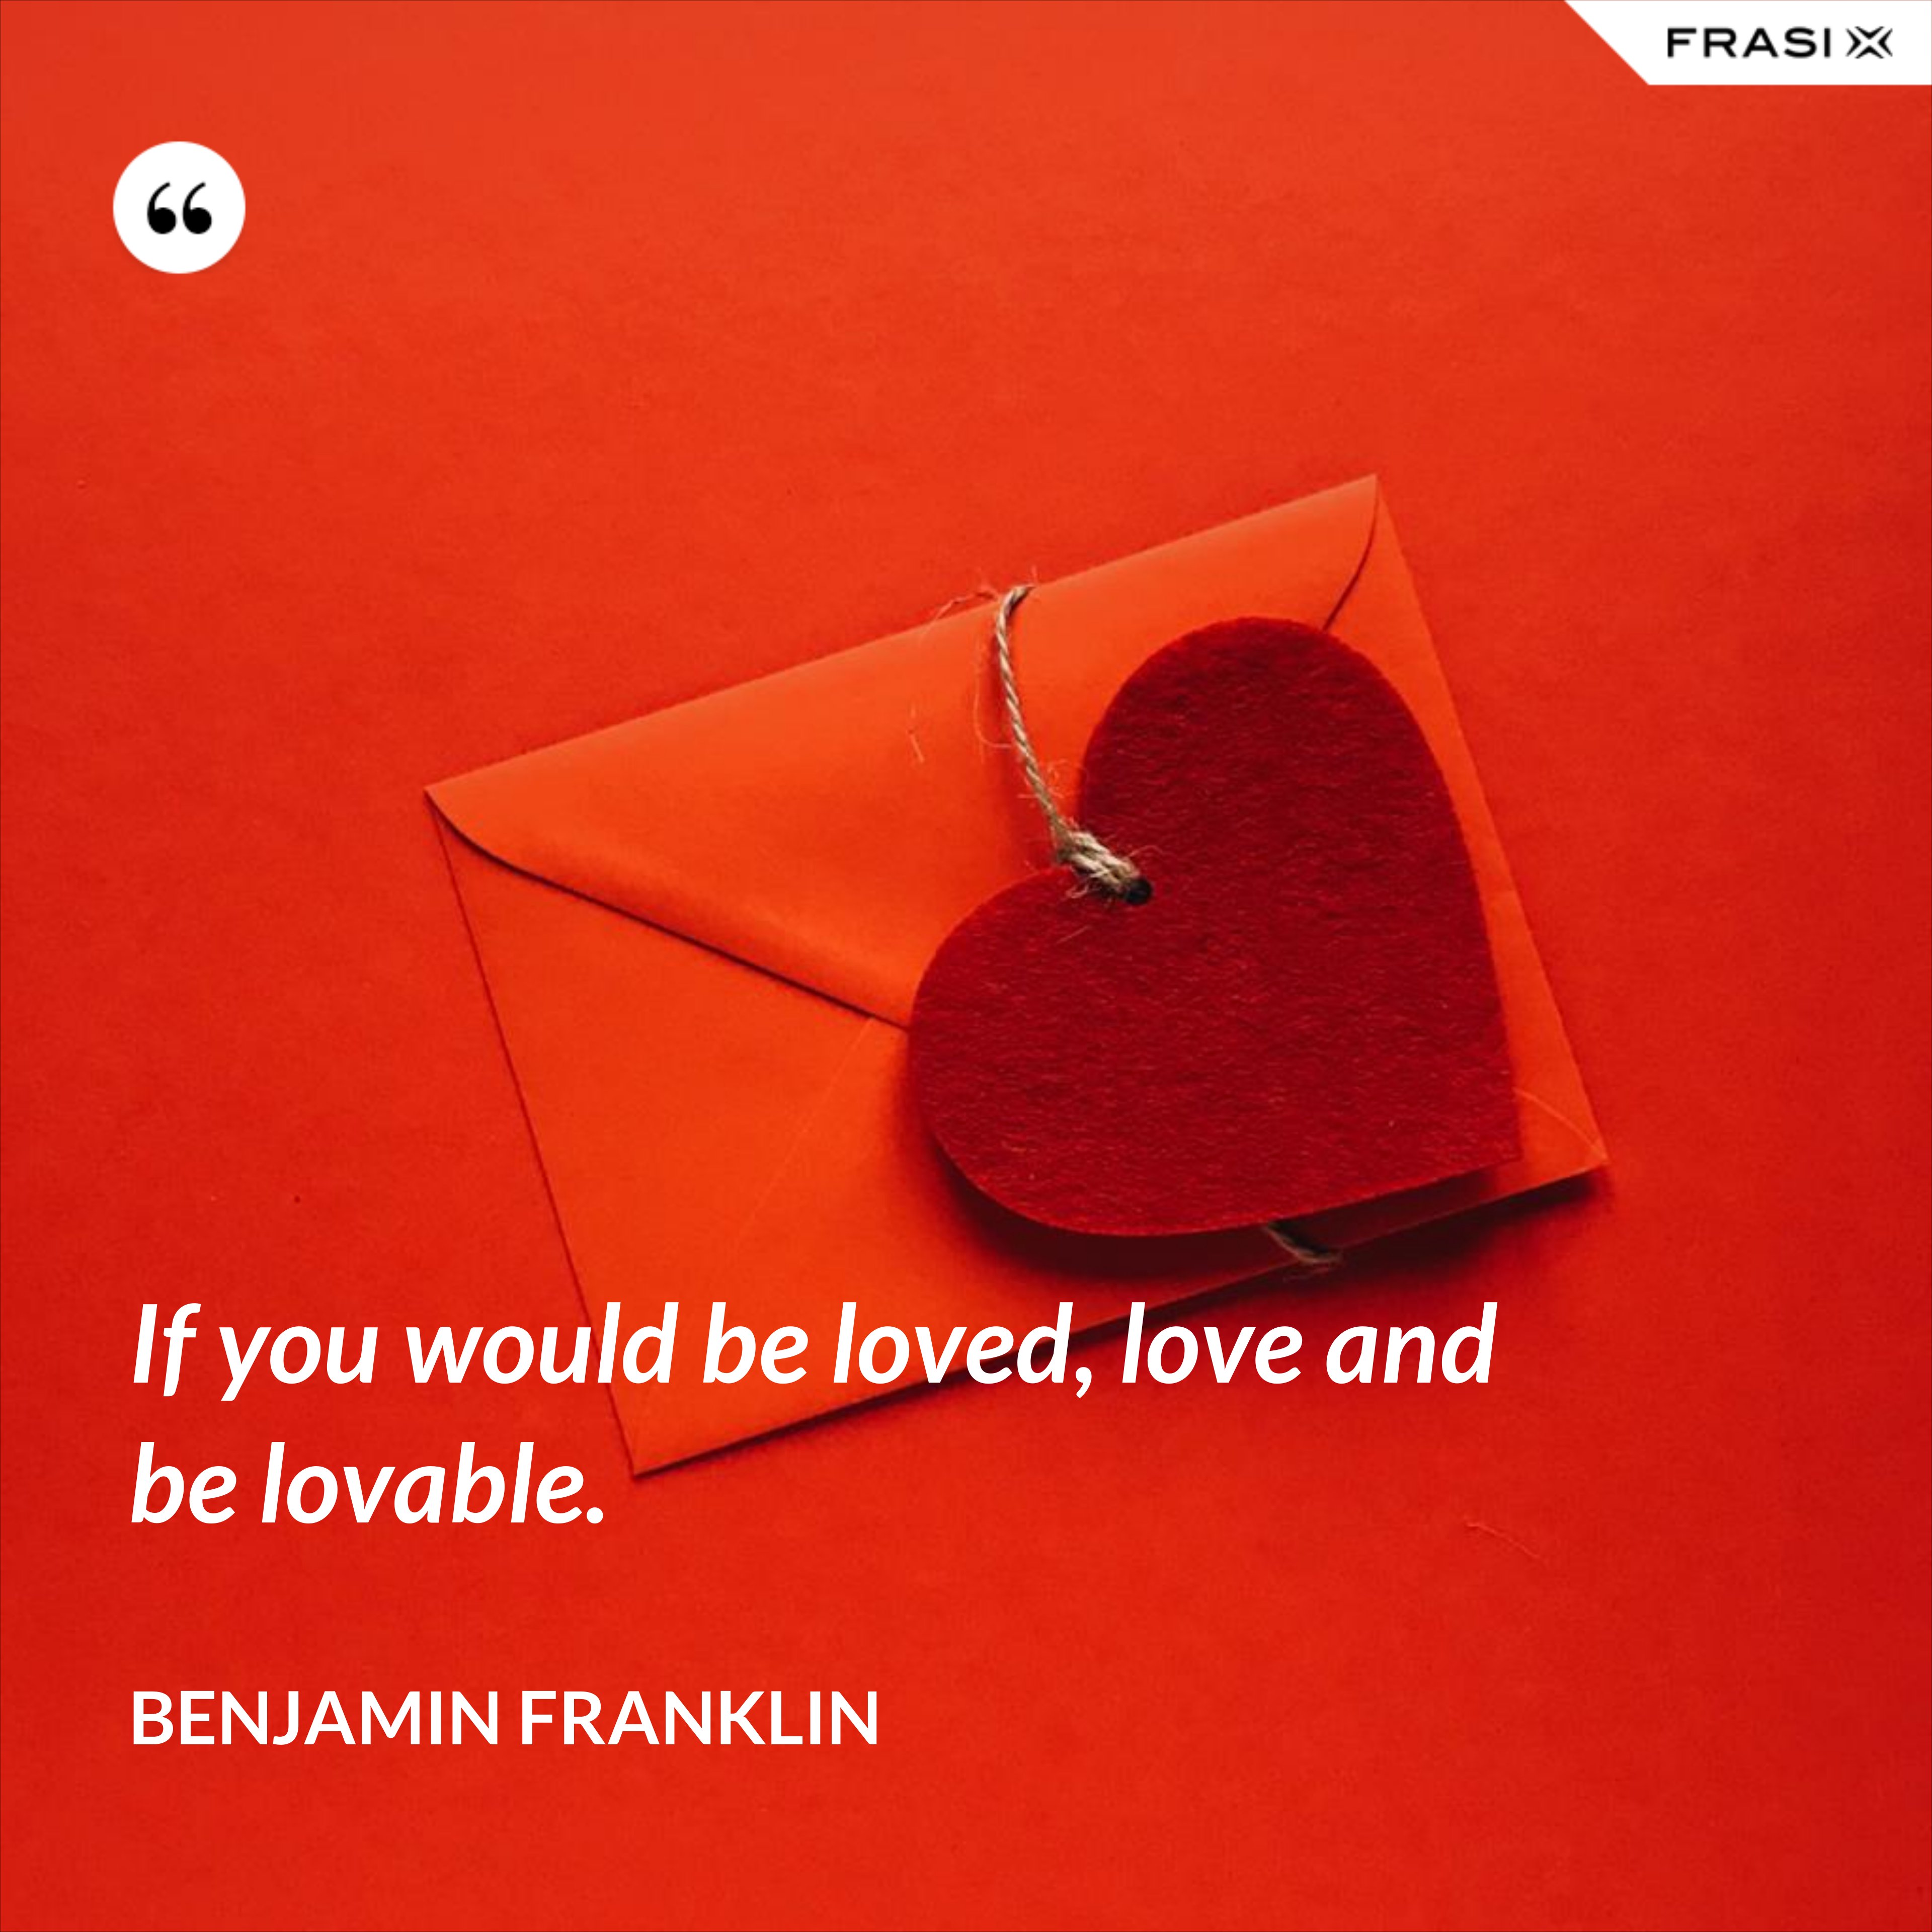 If you would be loved, love and be lovable. - Benjamin Franklin